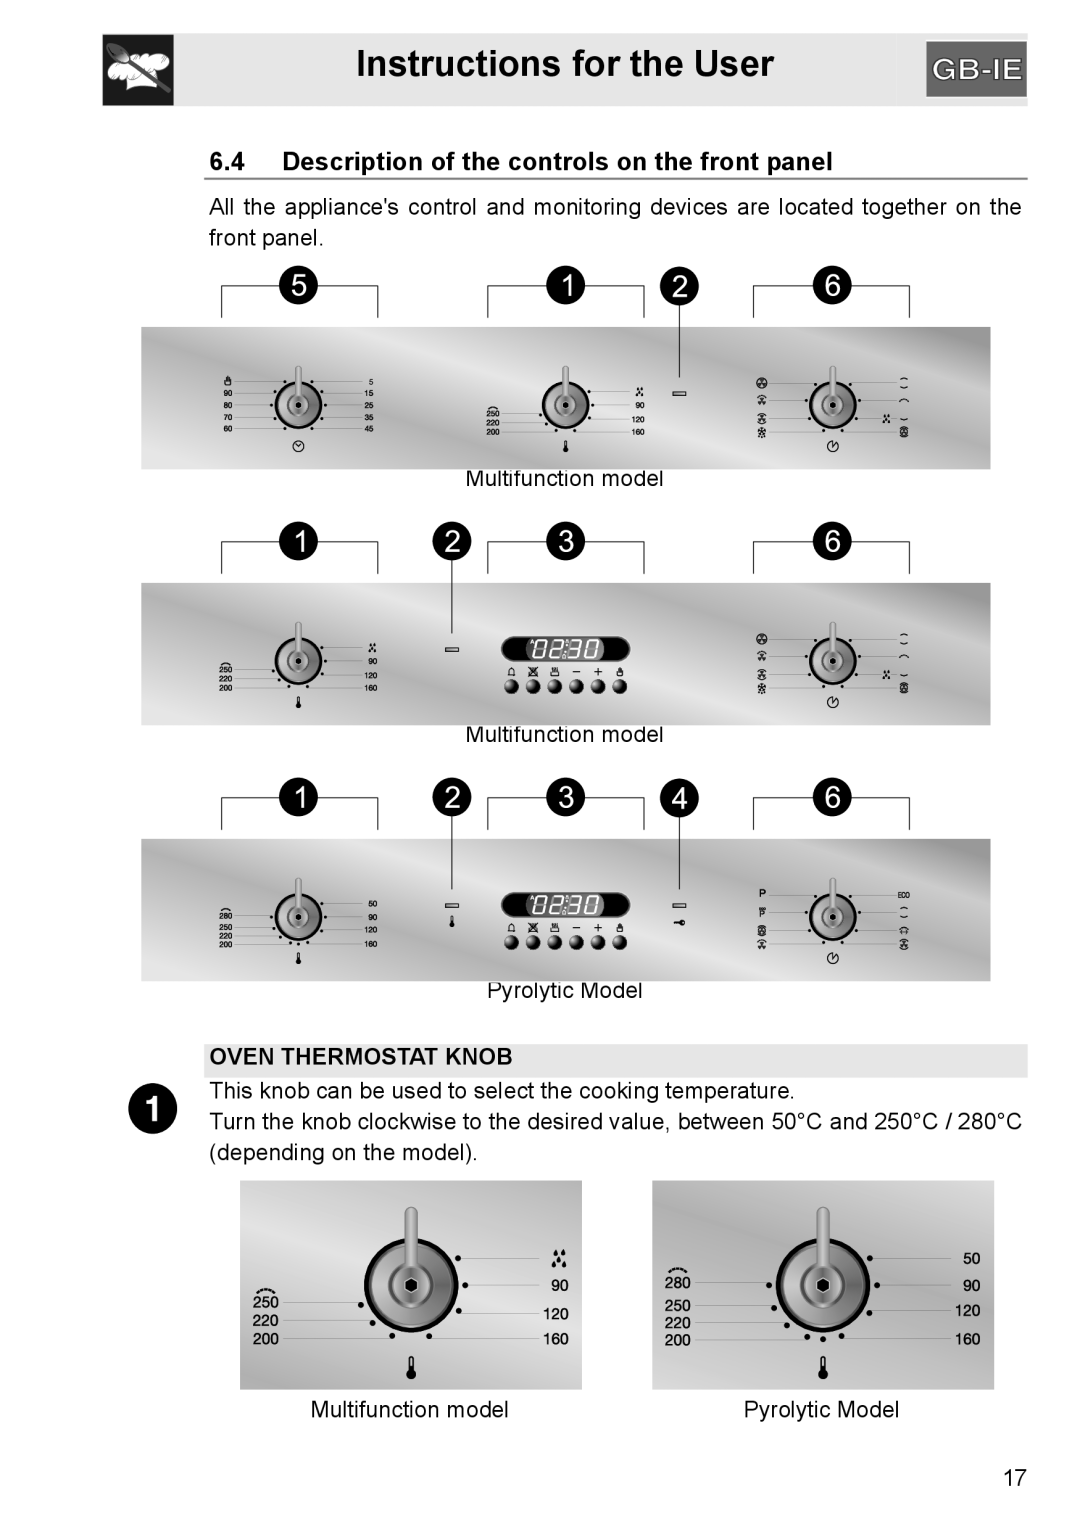 GE SA304X-8 manual 6.4Description of the controls on the front panel, Instructions for the User, Oven Thermostat Knob 